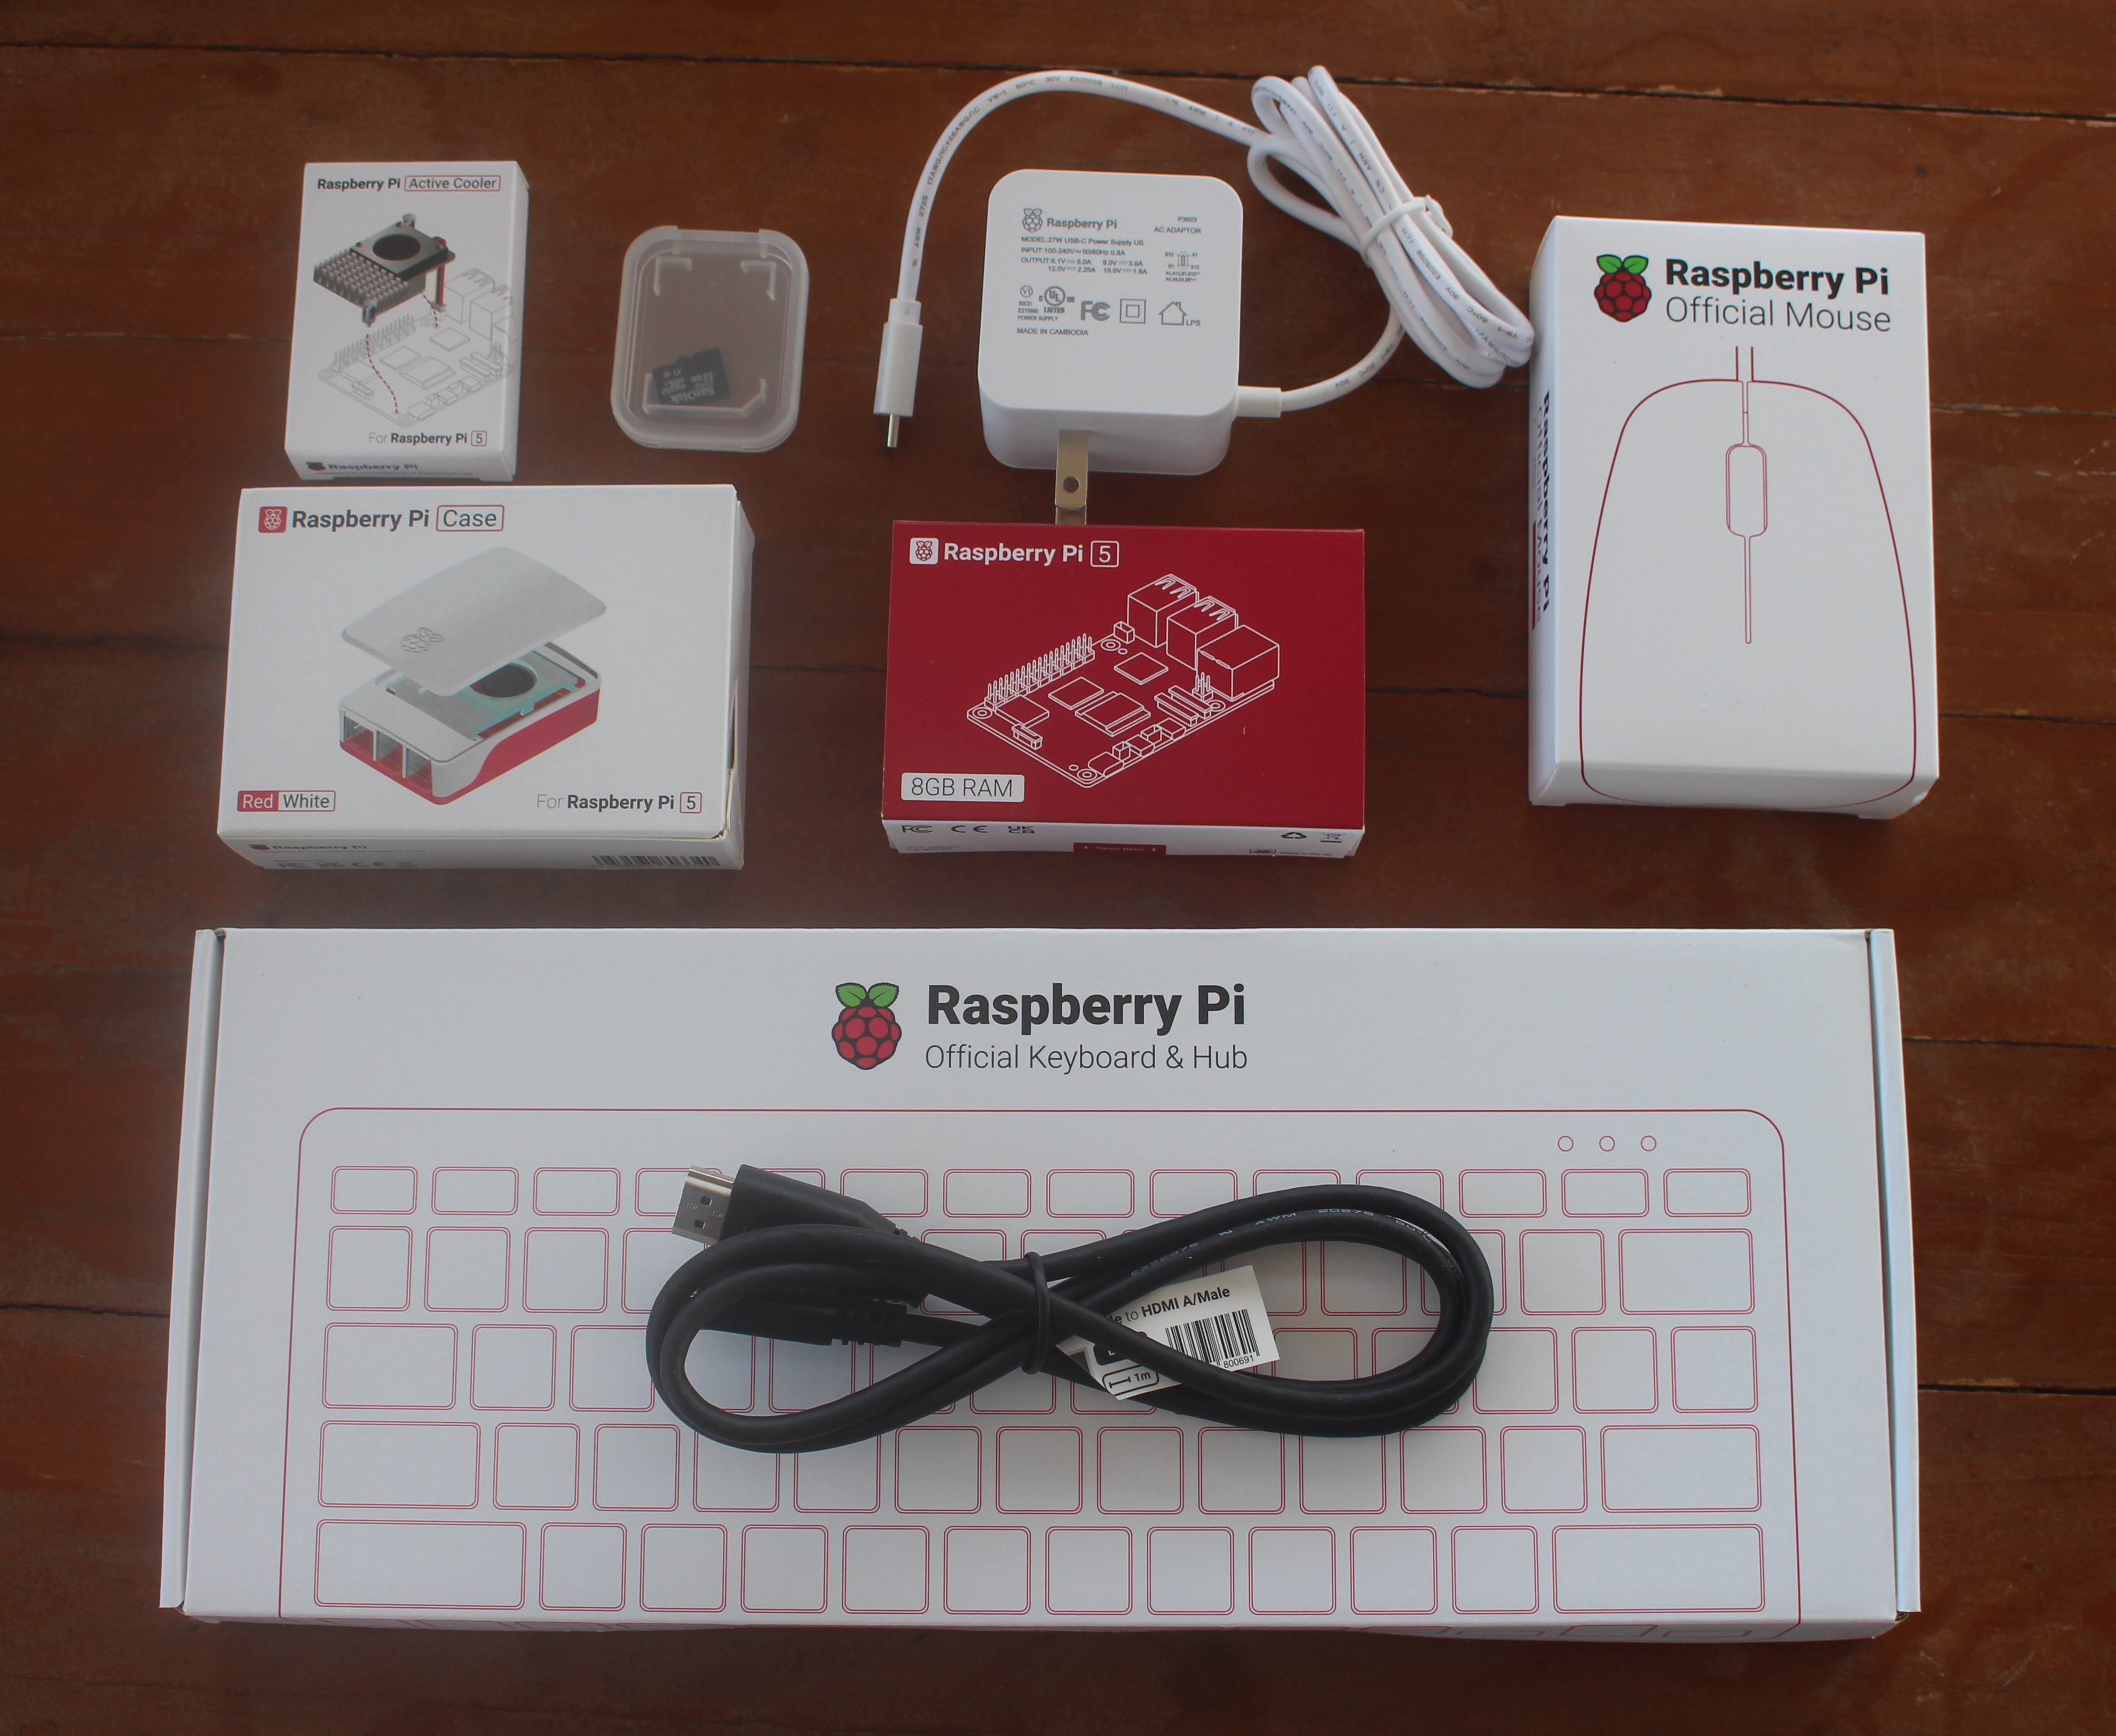 Raspberry Pi 5 Kit Review - Part 1: Unboxing, Assembly and First Boot - CNX  Software